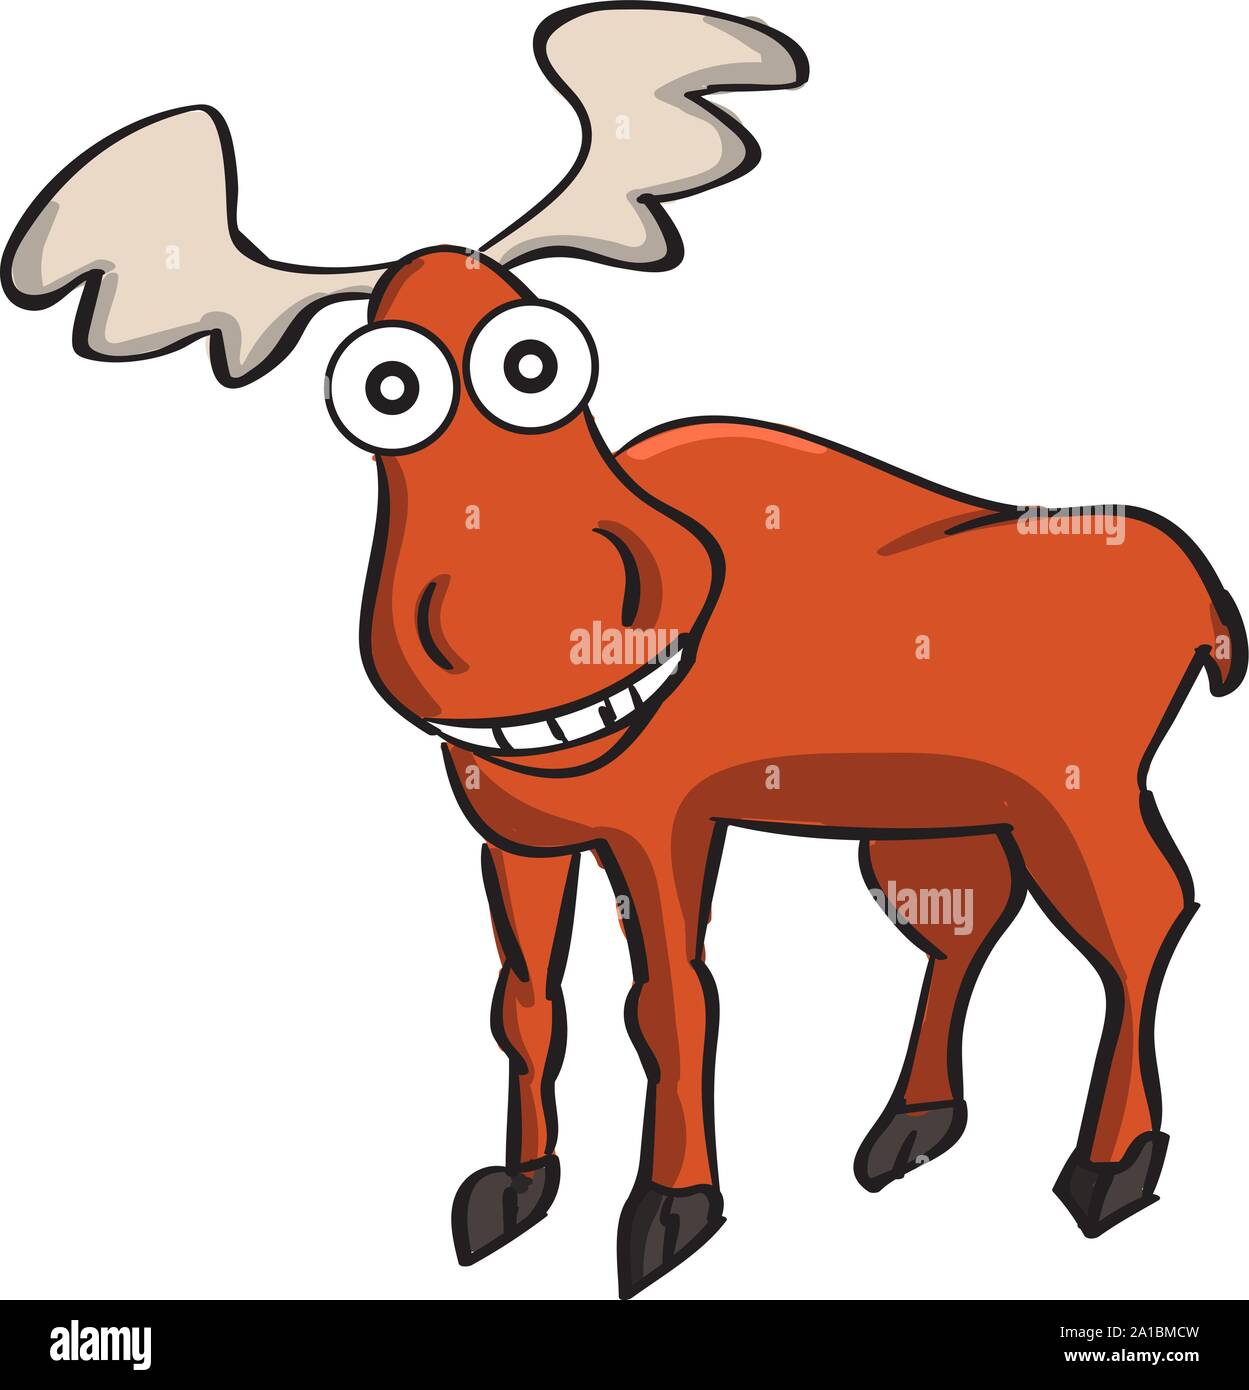 Crazy moose, illustration, vector on white background Stock Vector 